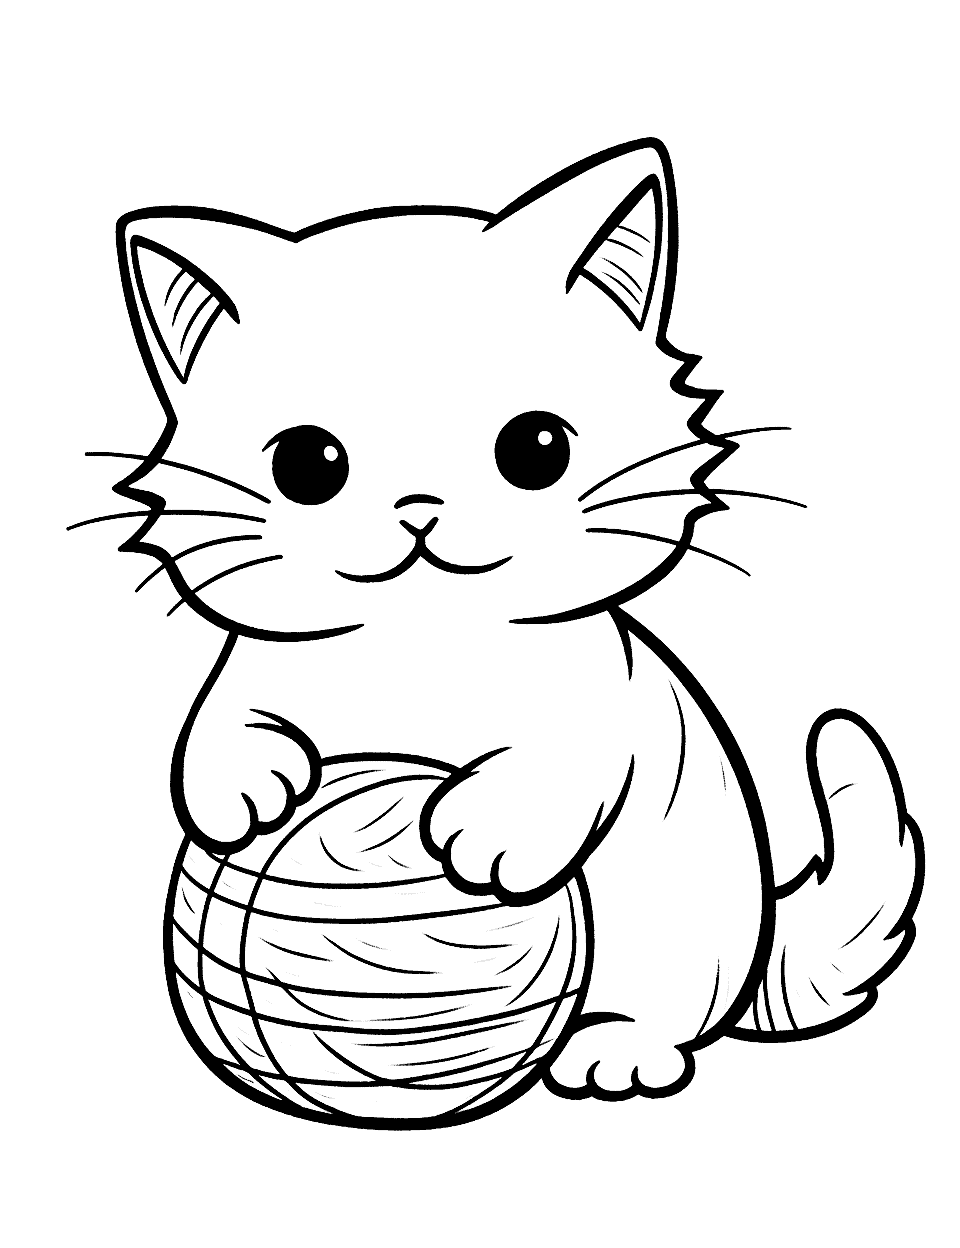 Cat and a Yarn Ball Coloring Page - An easy coloring page of a simple cat playing with a ball of yarn.